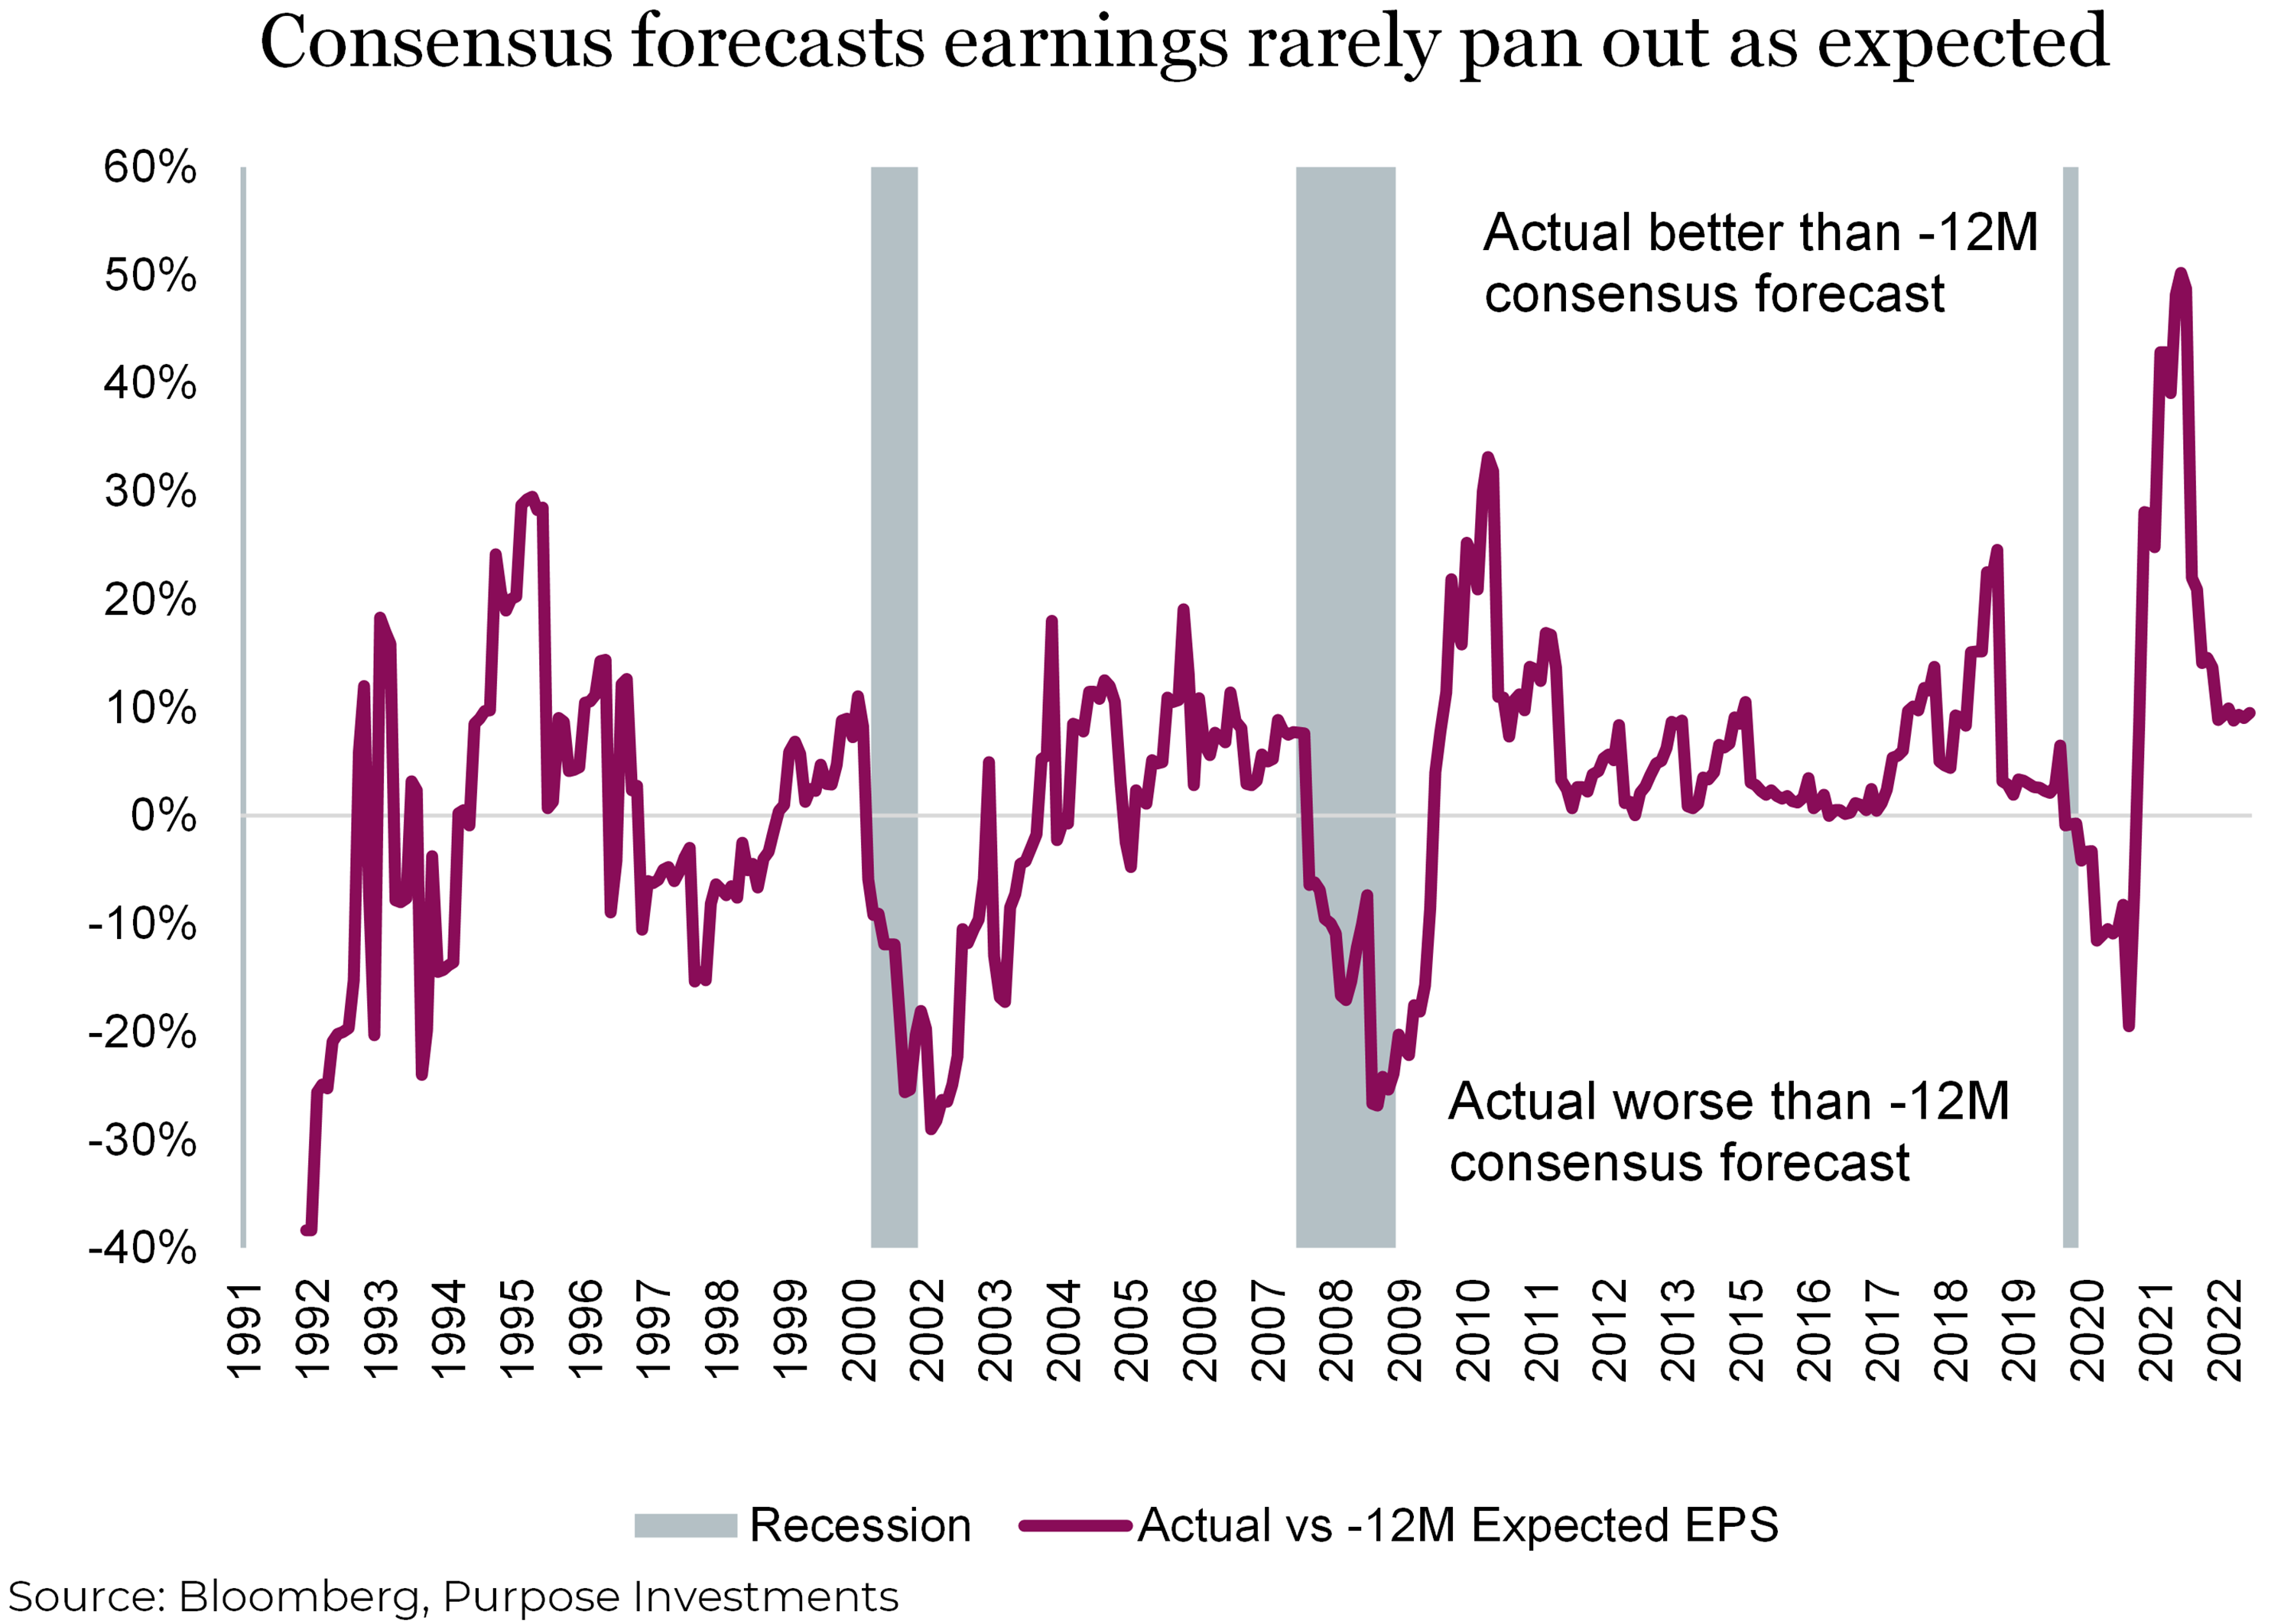 Consensus forecasts earnings rarely pan out as expected